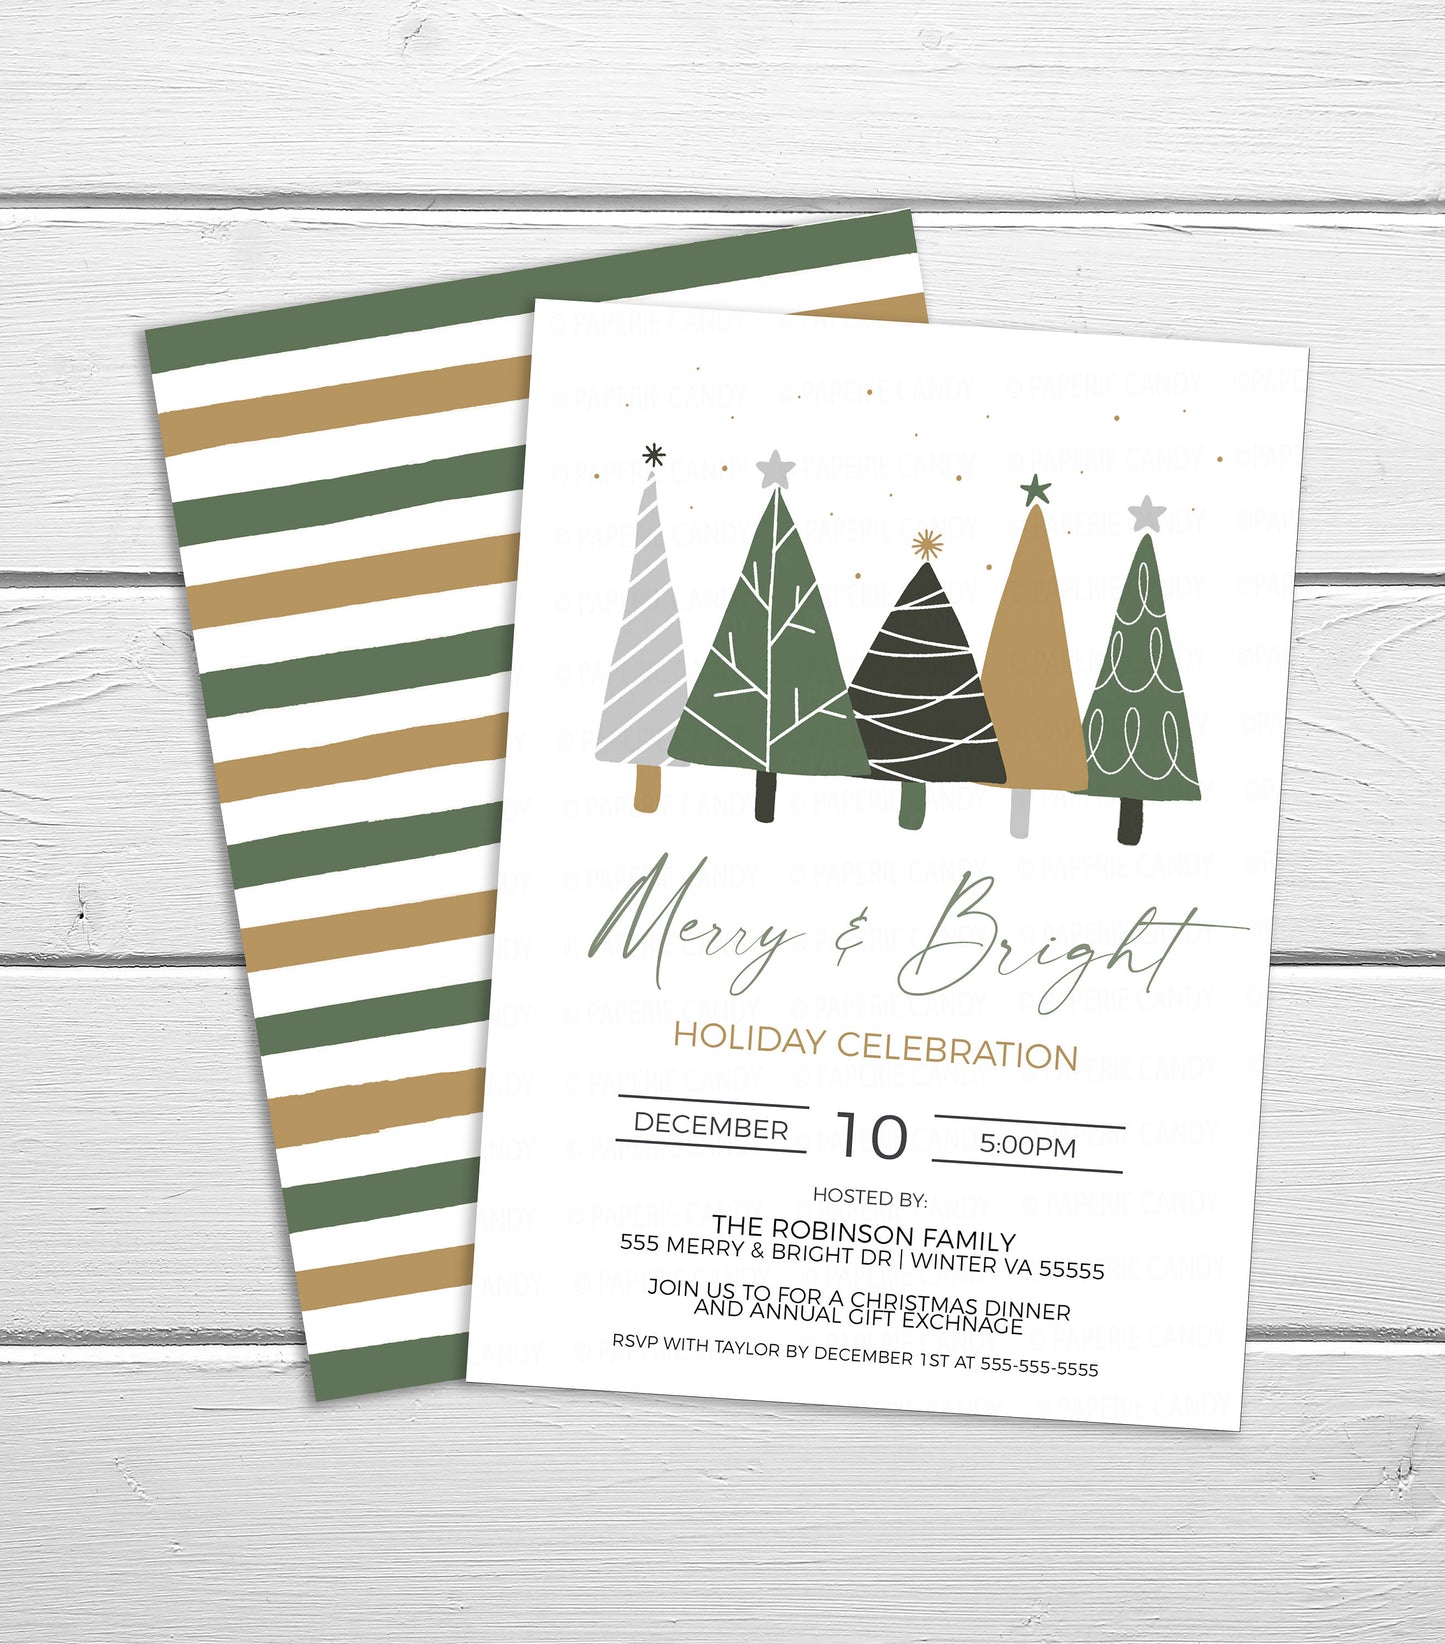 Merry And Bright Invitation, Editable Holiday Party Invite, Christmas Trees, Company Work Event, Christmas Lunch Dinner Luncheon, Printable